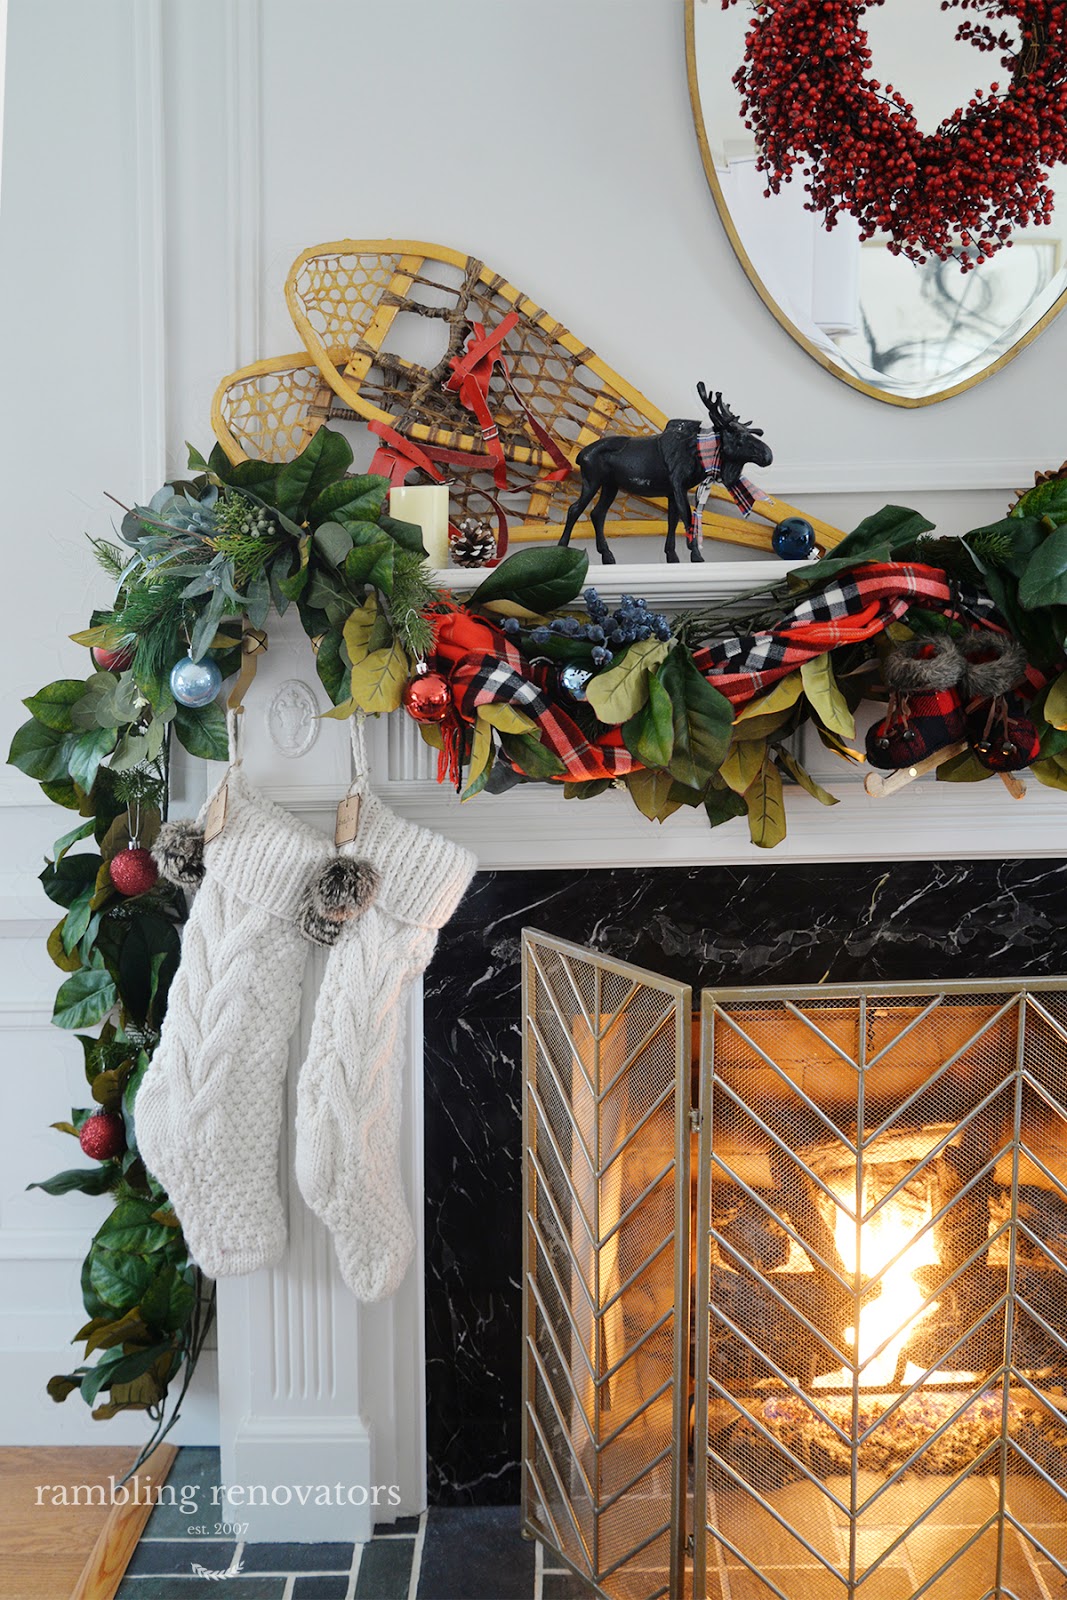 A lush and colourful red and blue Christmas mantel with a plaid scarf, blueberry picks and rustic accents